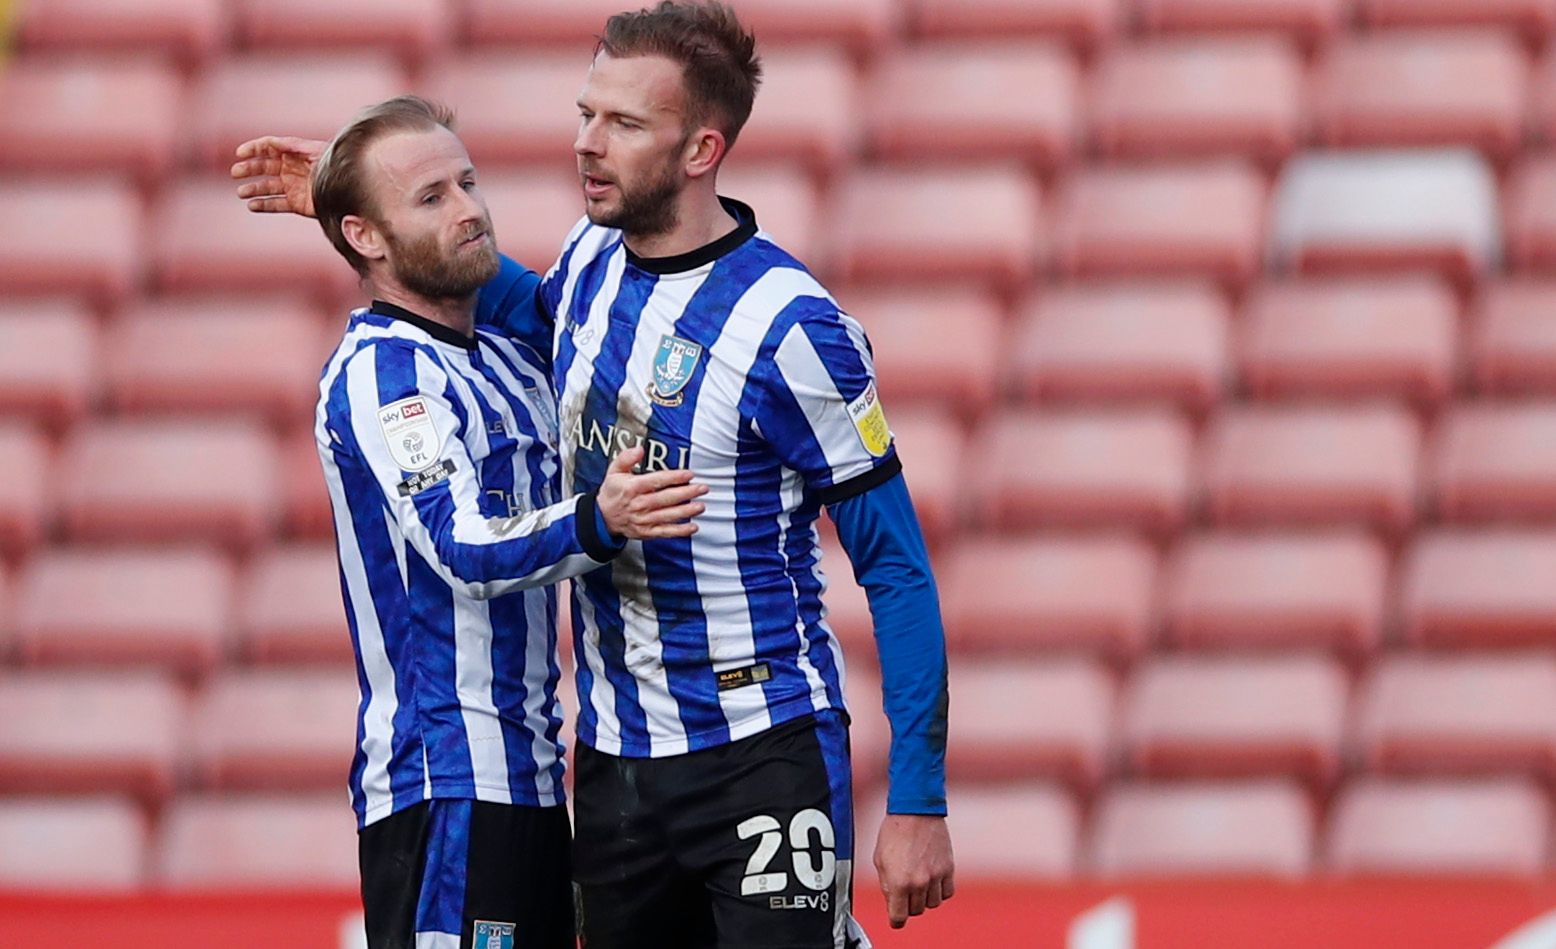 Soccer Football - Championship - Barnsley v Sheffield Wednesday - Oakwell, Barnsley, Britain - March 20, 2021 Sheffield Wednesday's Barry Bannan and Jordan Rhodes celebrate after the match Action Images/Andrew Boyers EDITORIAL USE ONLY. No use with unauthorized audio, video, data, fixture lists, club/league logos or 'live' services. Online in-match use limited to 75 images, no video emulation. No use in betting, games or single club /league/player publications.  Please contact your account repre